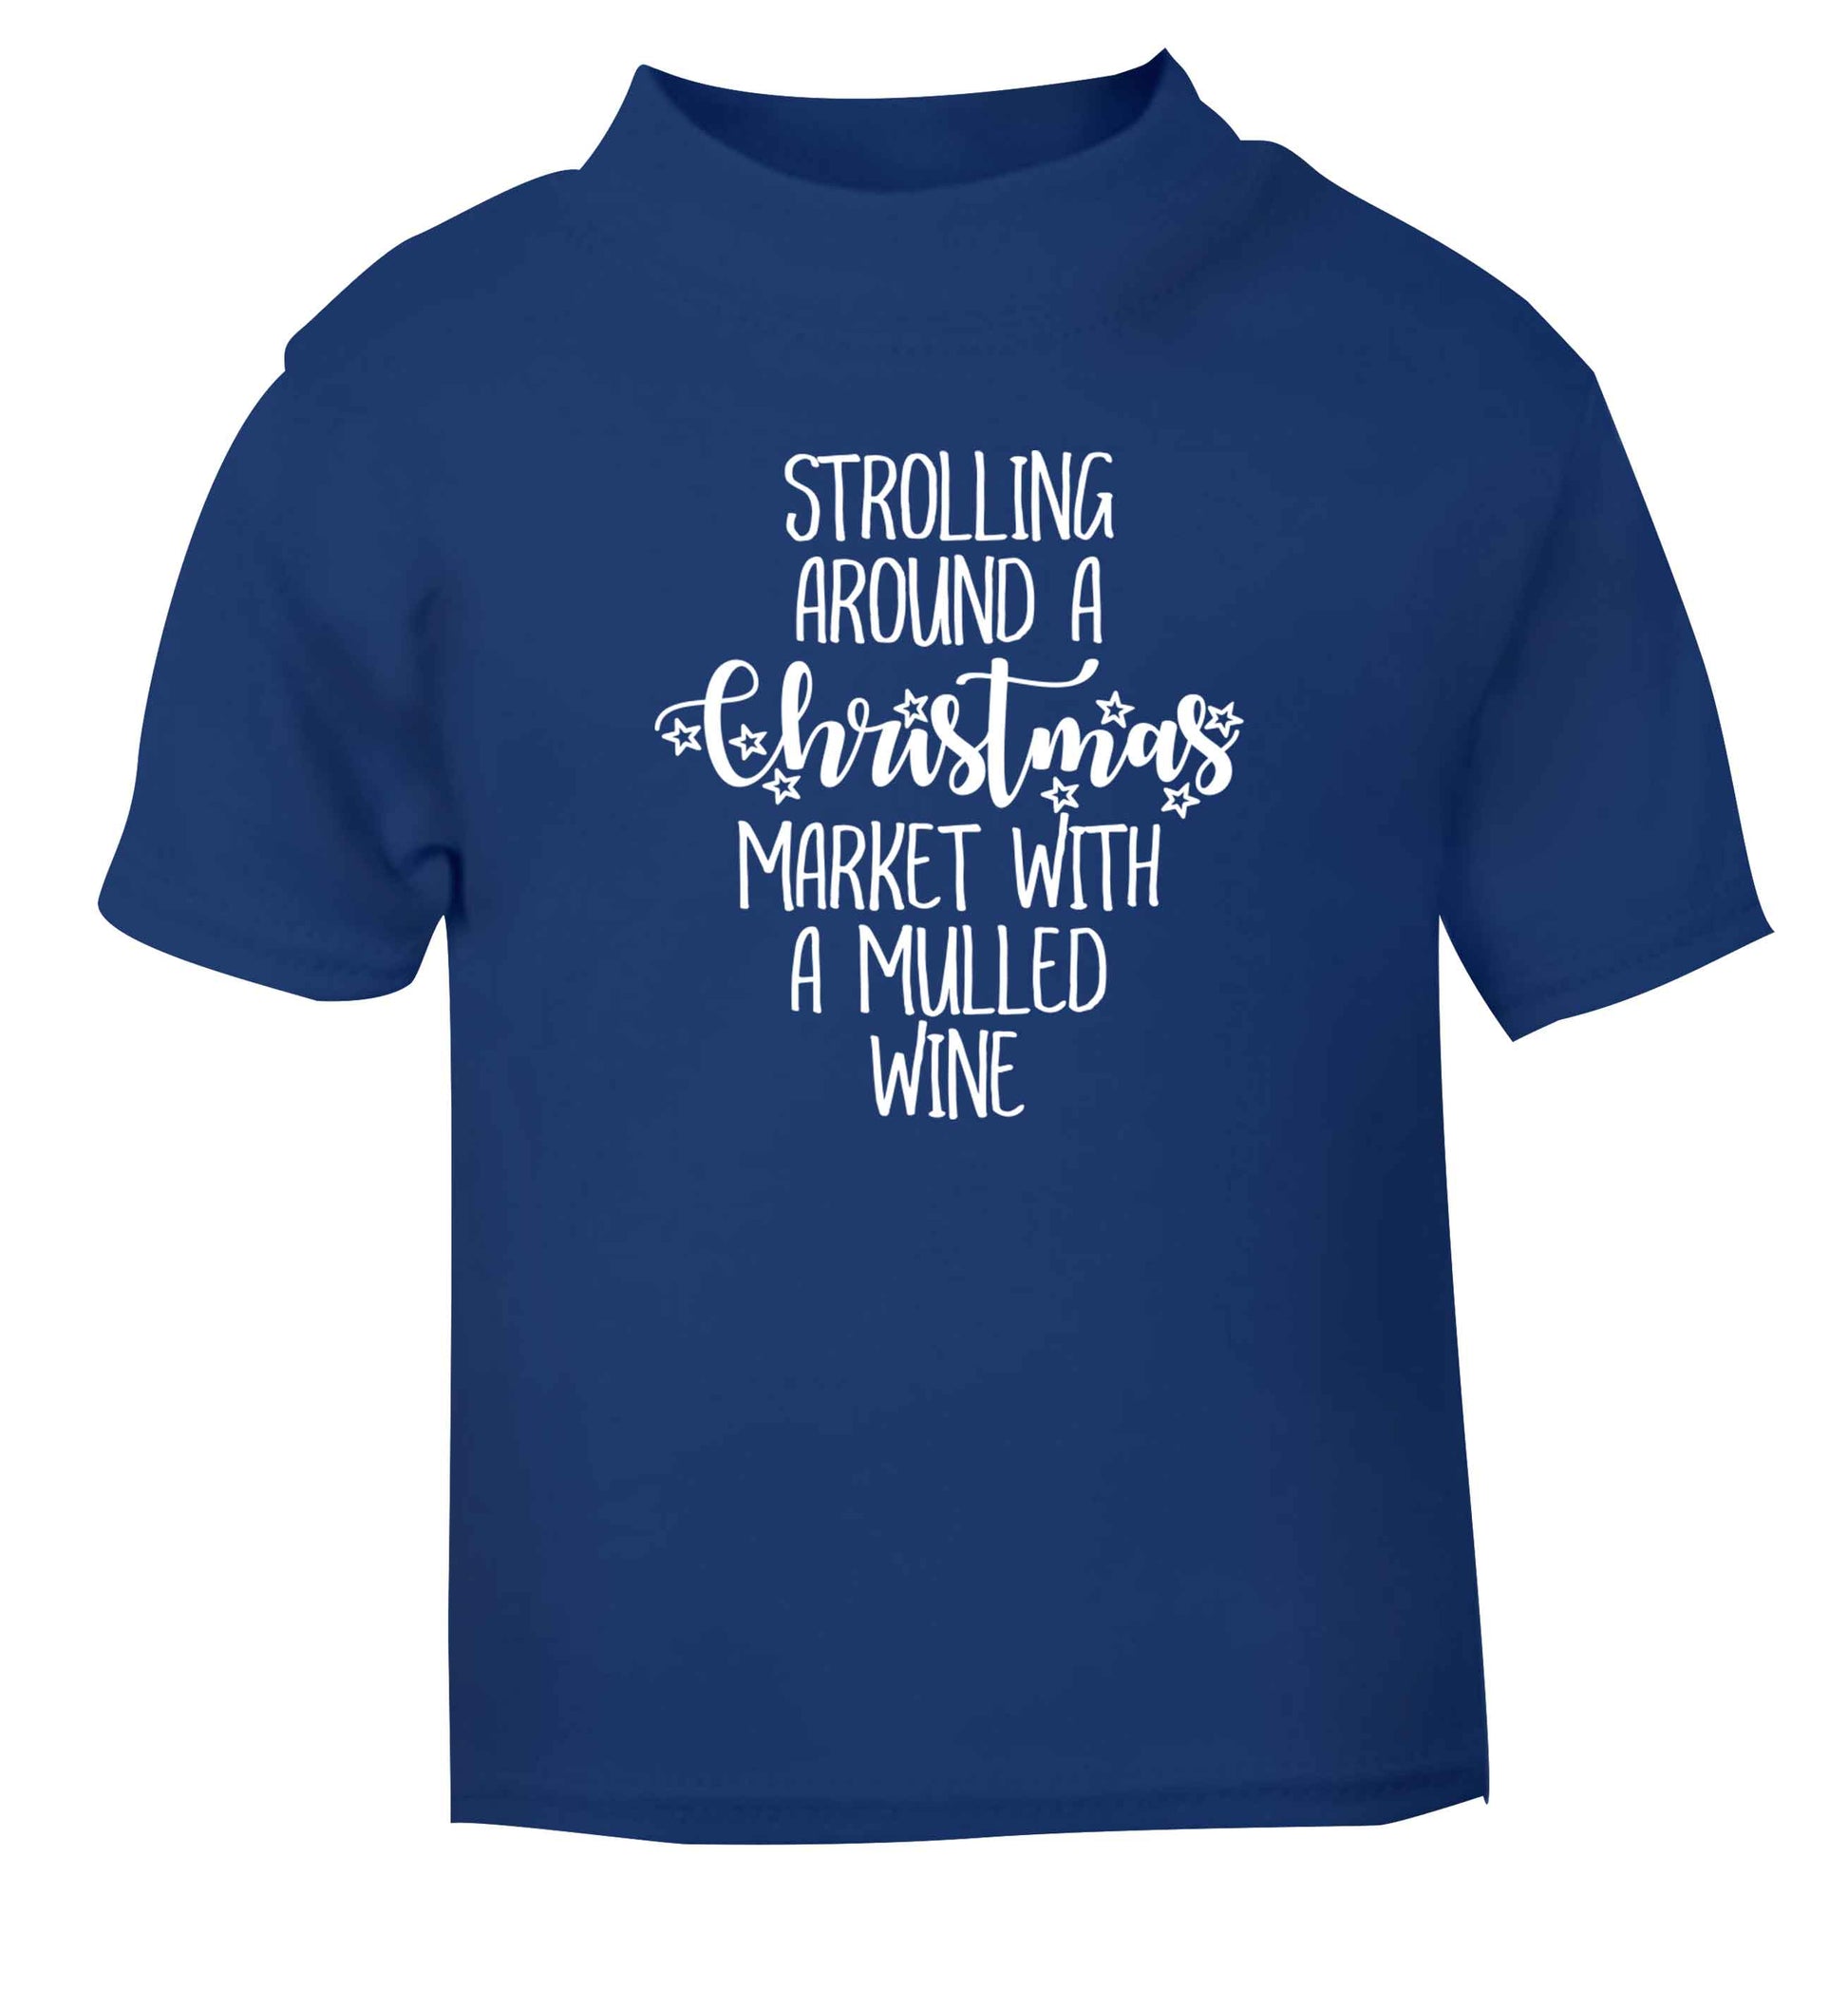 Strolling around a Christmas market with mulled wine blue Baby Toddler Tshirt 2 Years